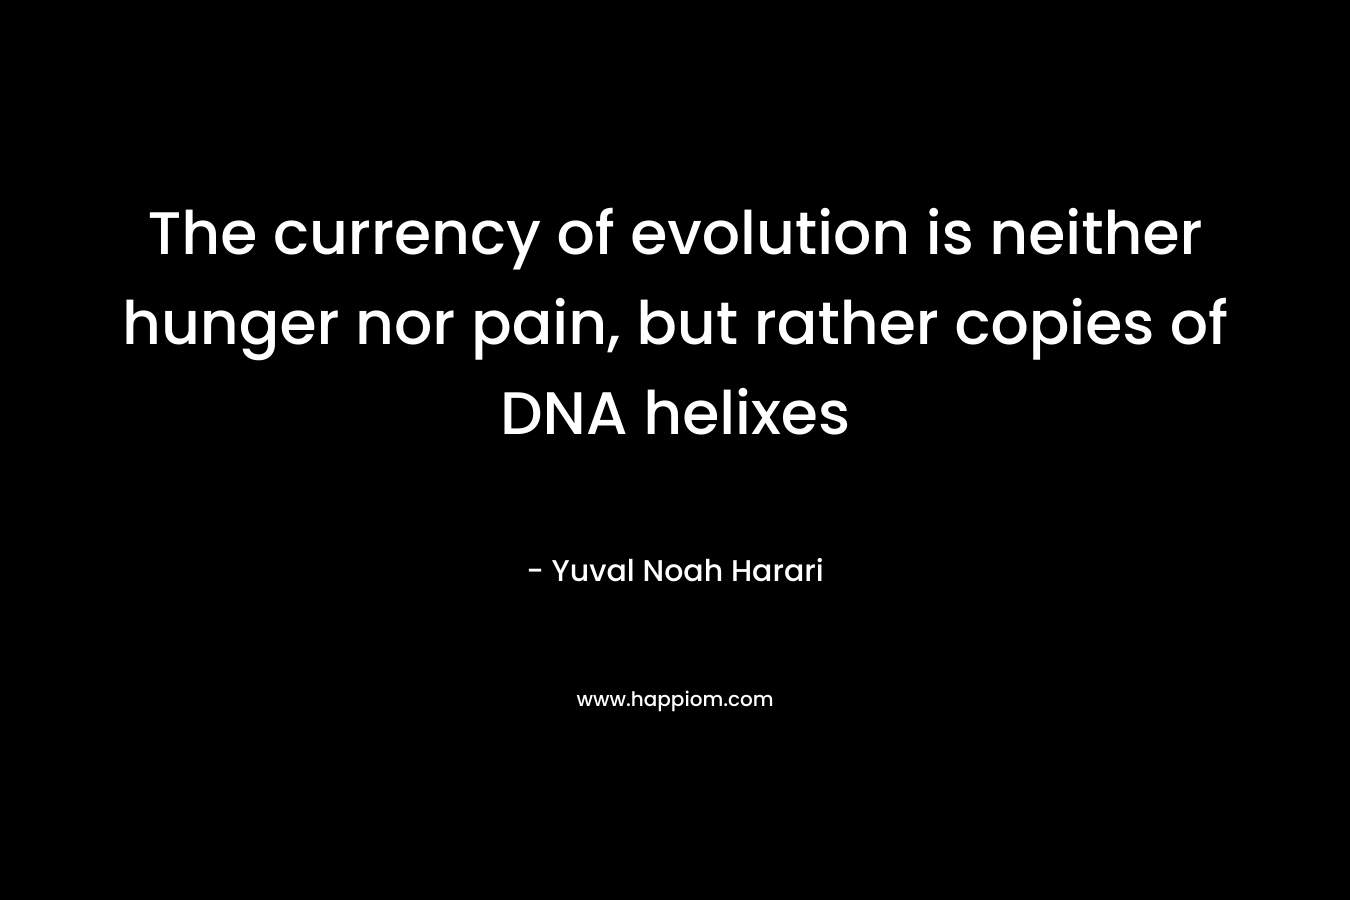 The currency of evolution is neither hunger nor pain, but rather copies of DNA helixes – Yuval Noah Harari